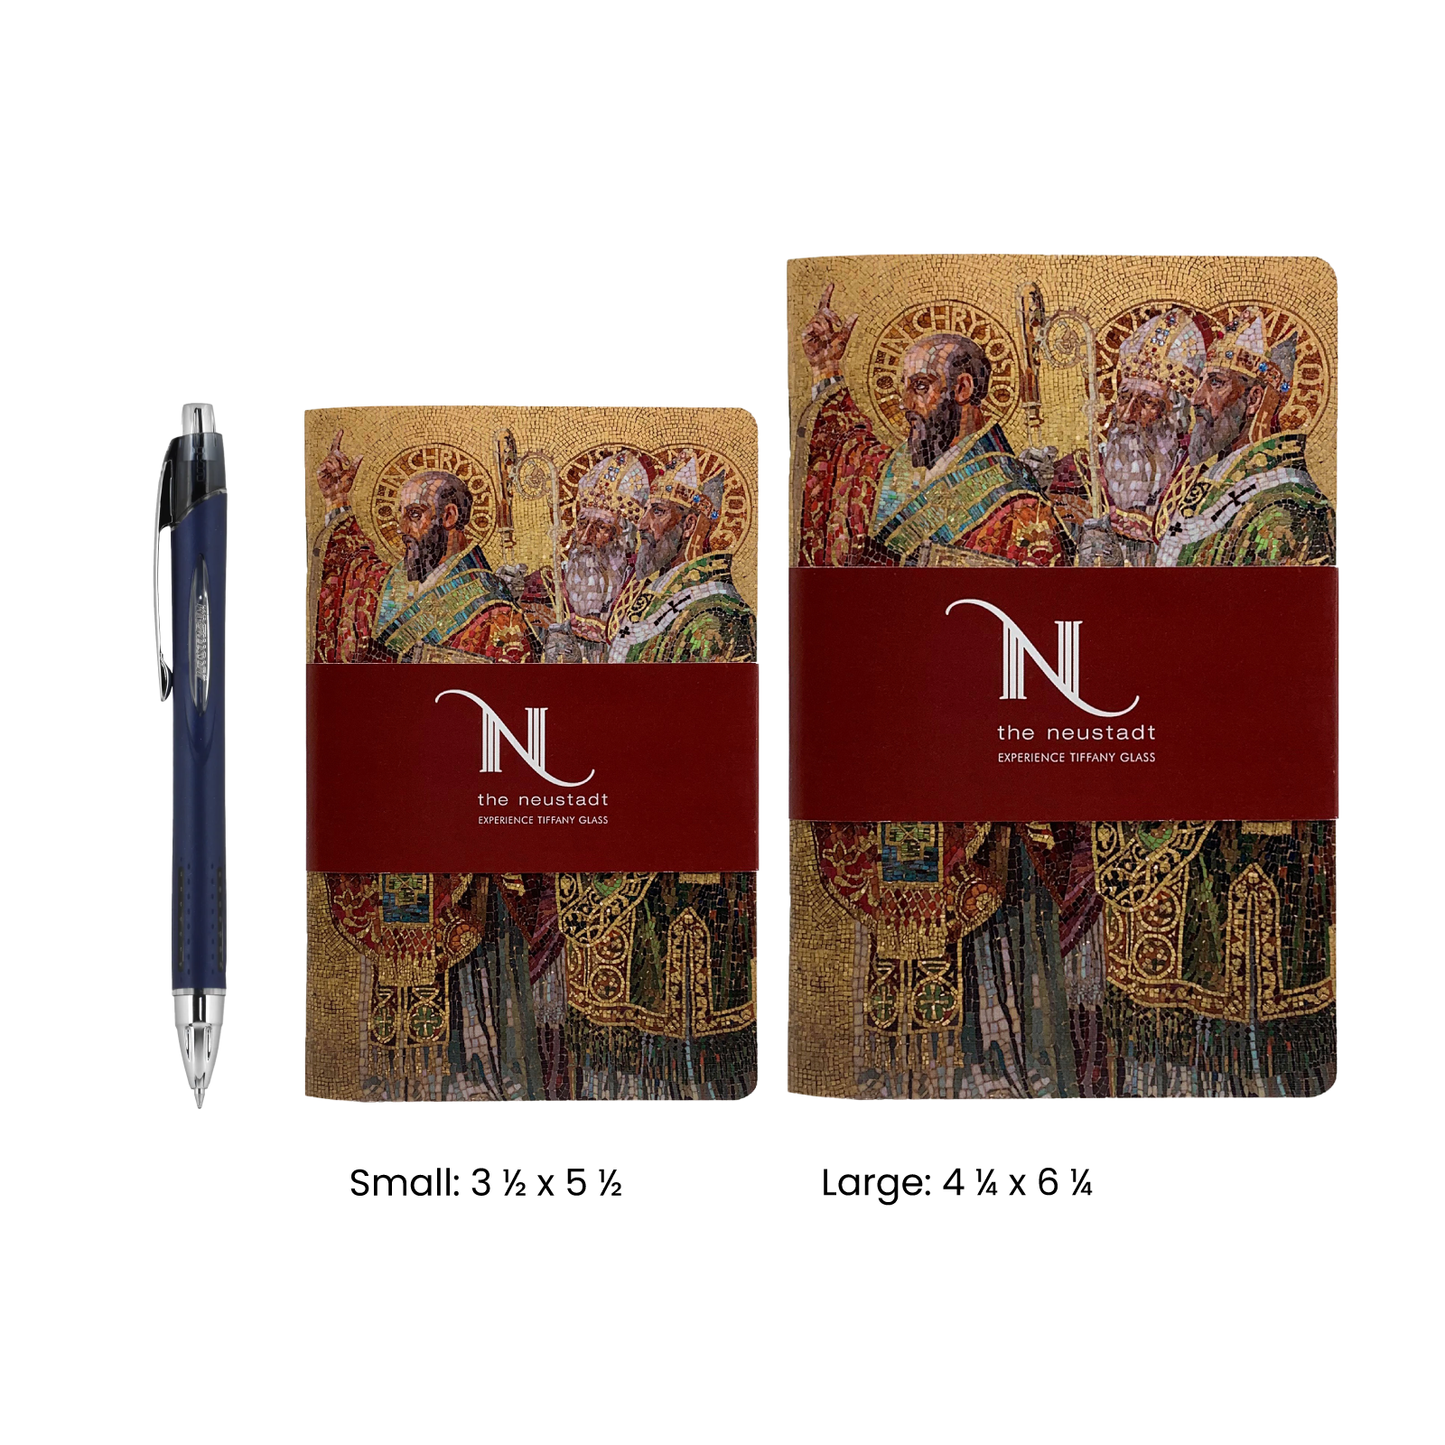 "Fathers of the Church" Mosaic pocket notebook, 2 size options